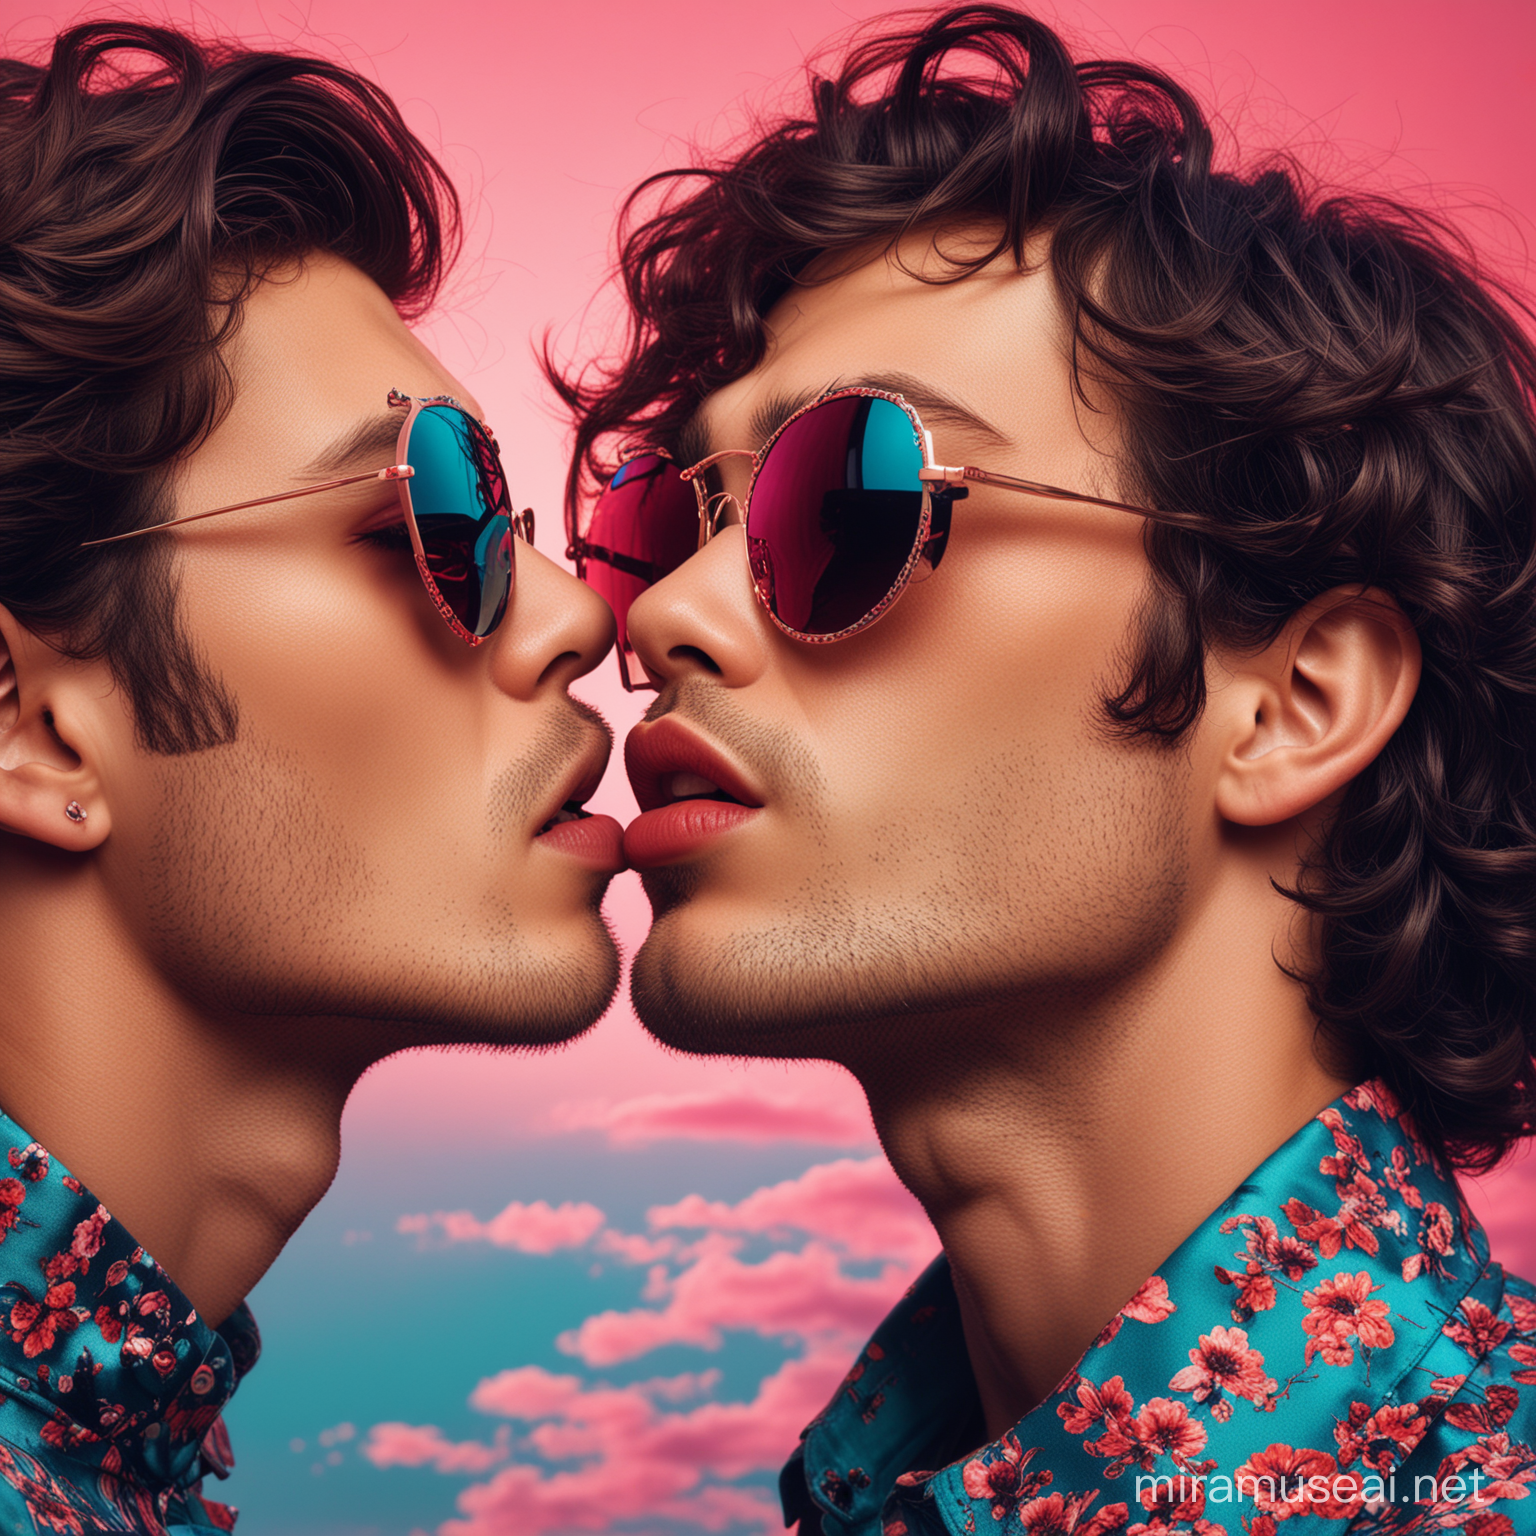 psychedelic, extremely high quality high detail, psychedelic fashion photography, fashion art, beautiful model, pink and teal edgy sun glasses, red lipstick, kissing a man with wild dark hair